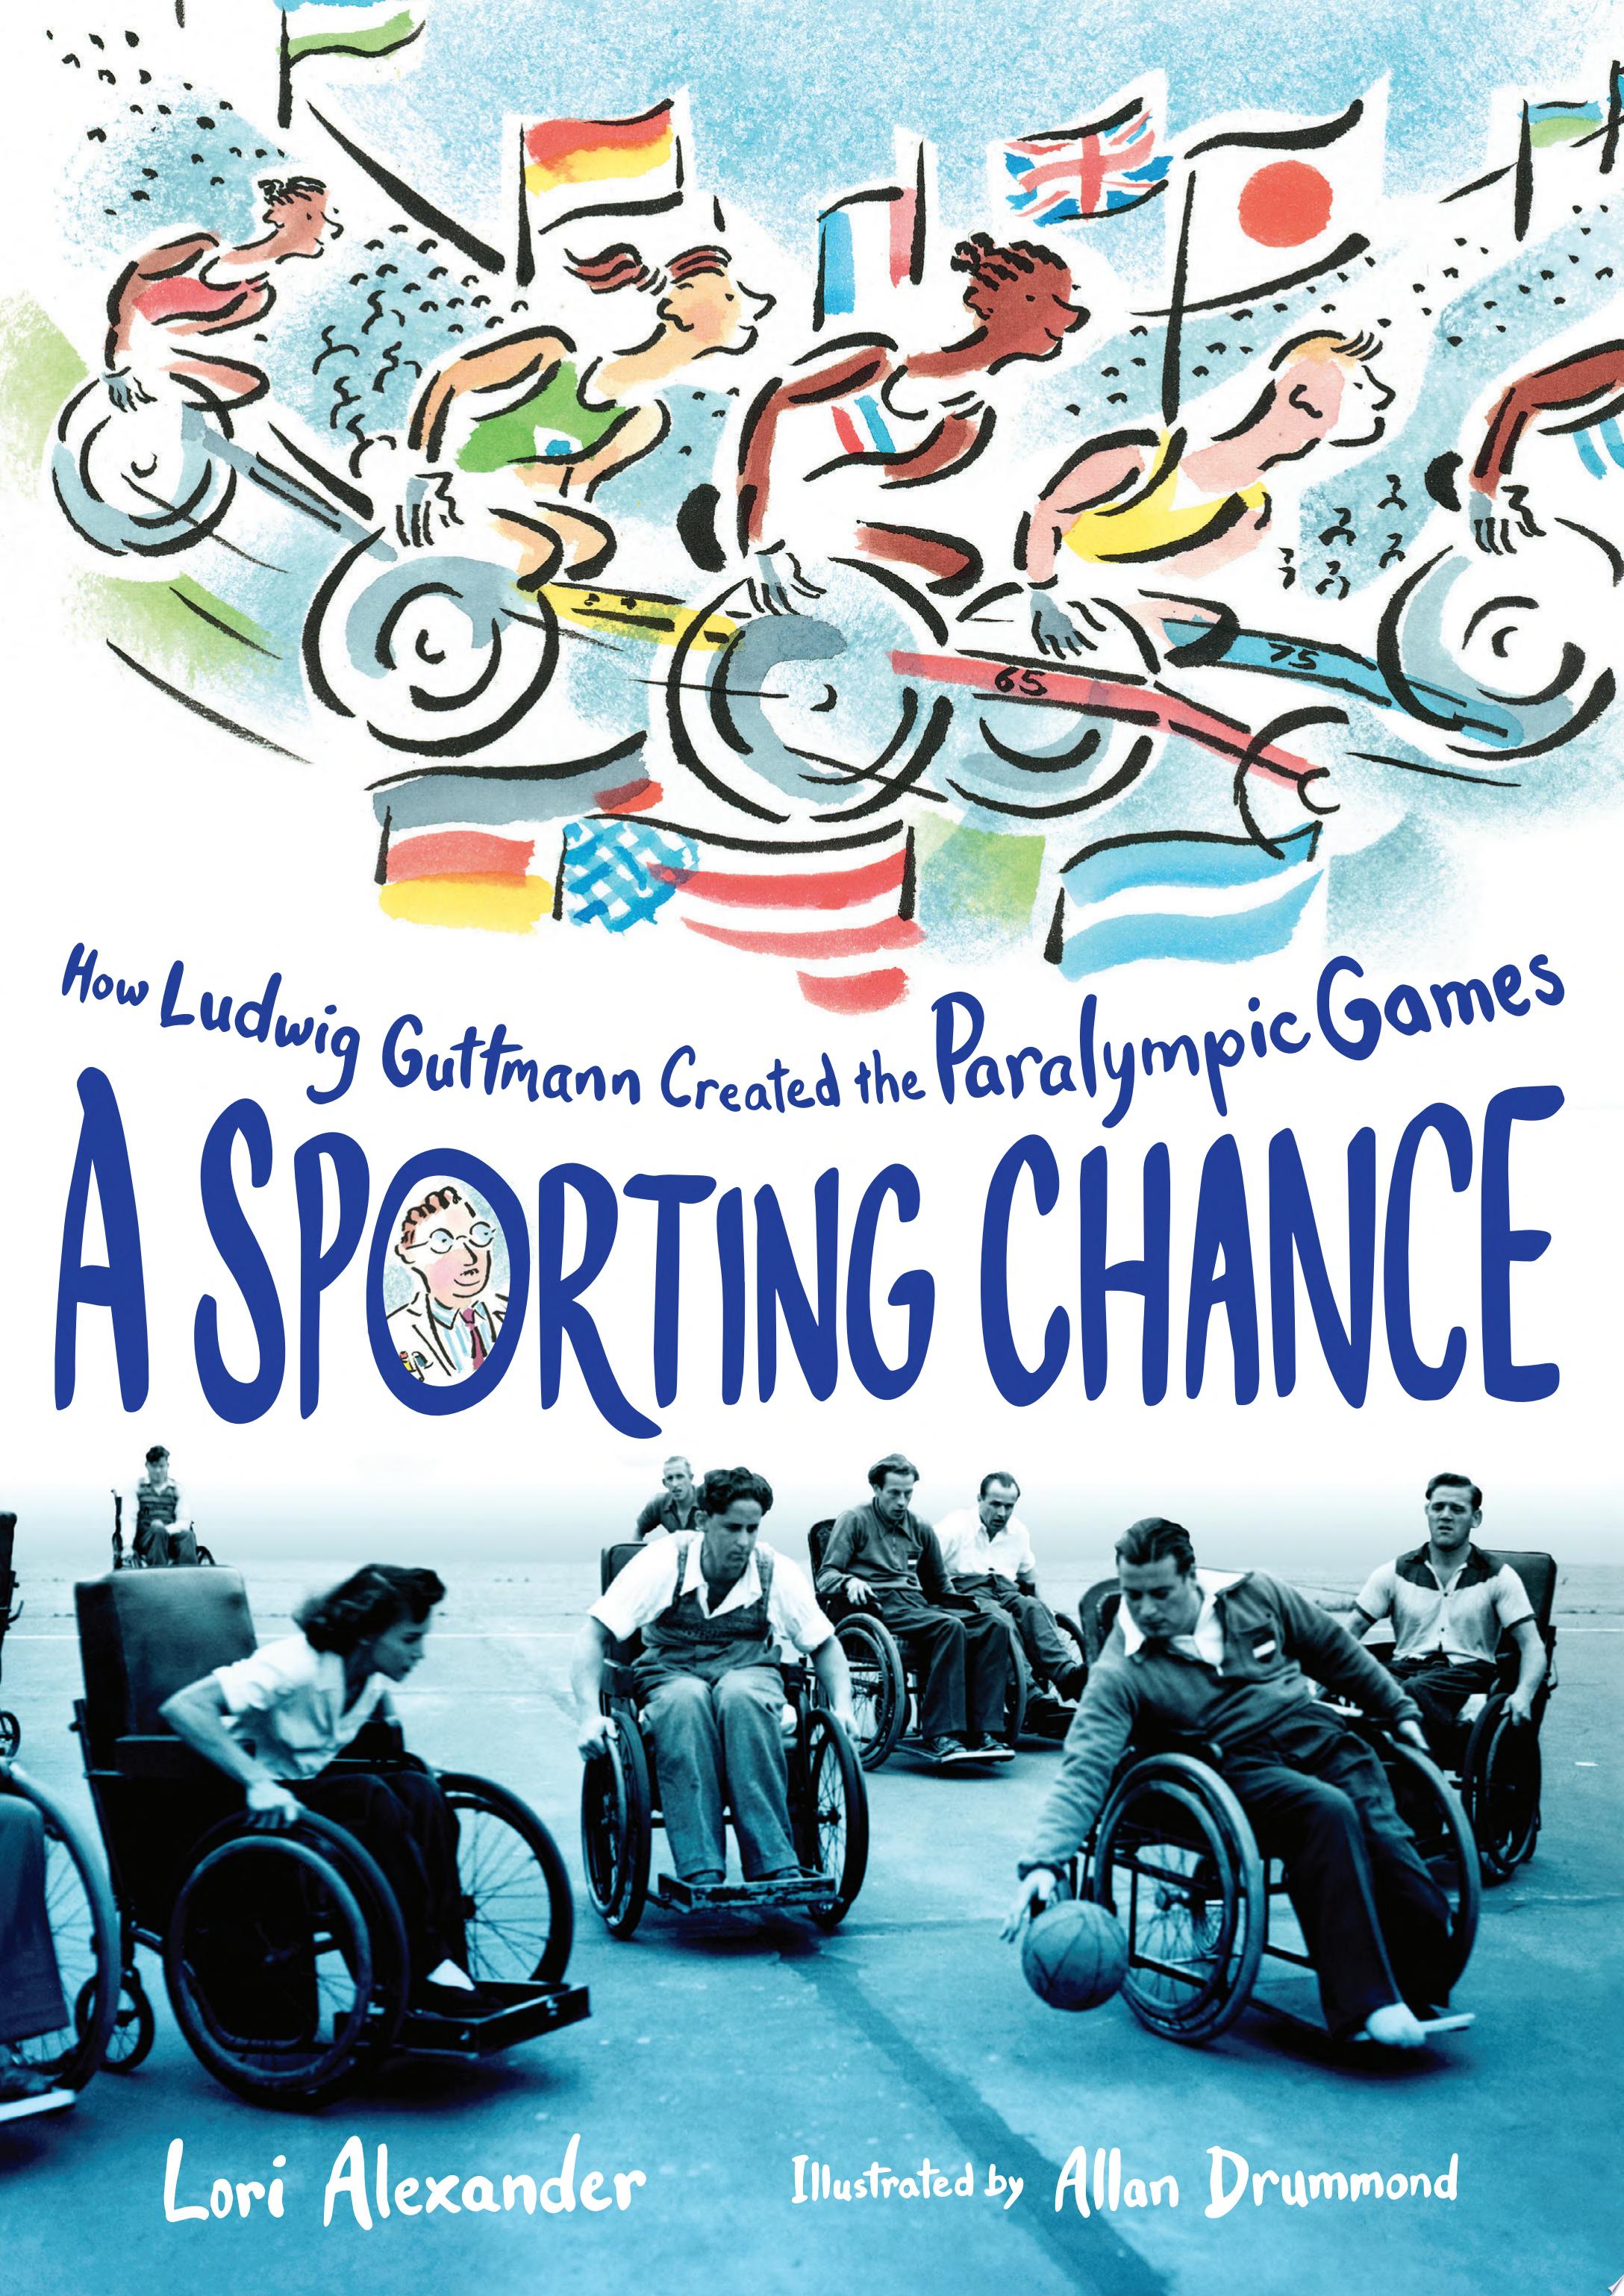 Image for "A Sporting Chance"